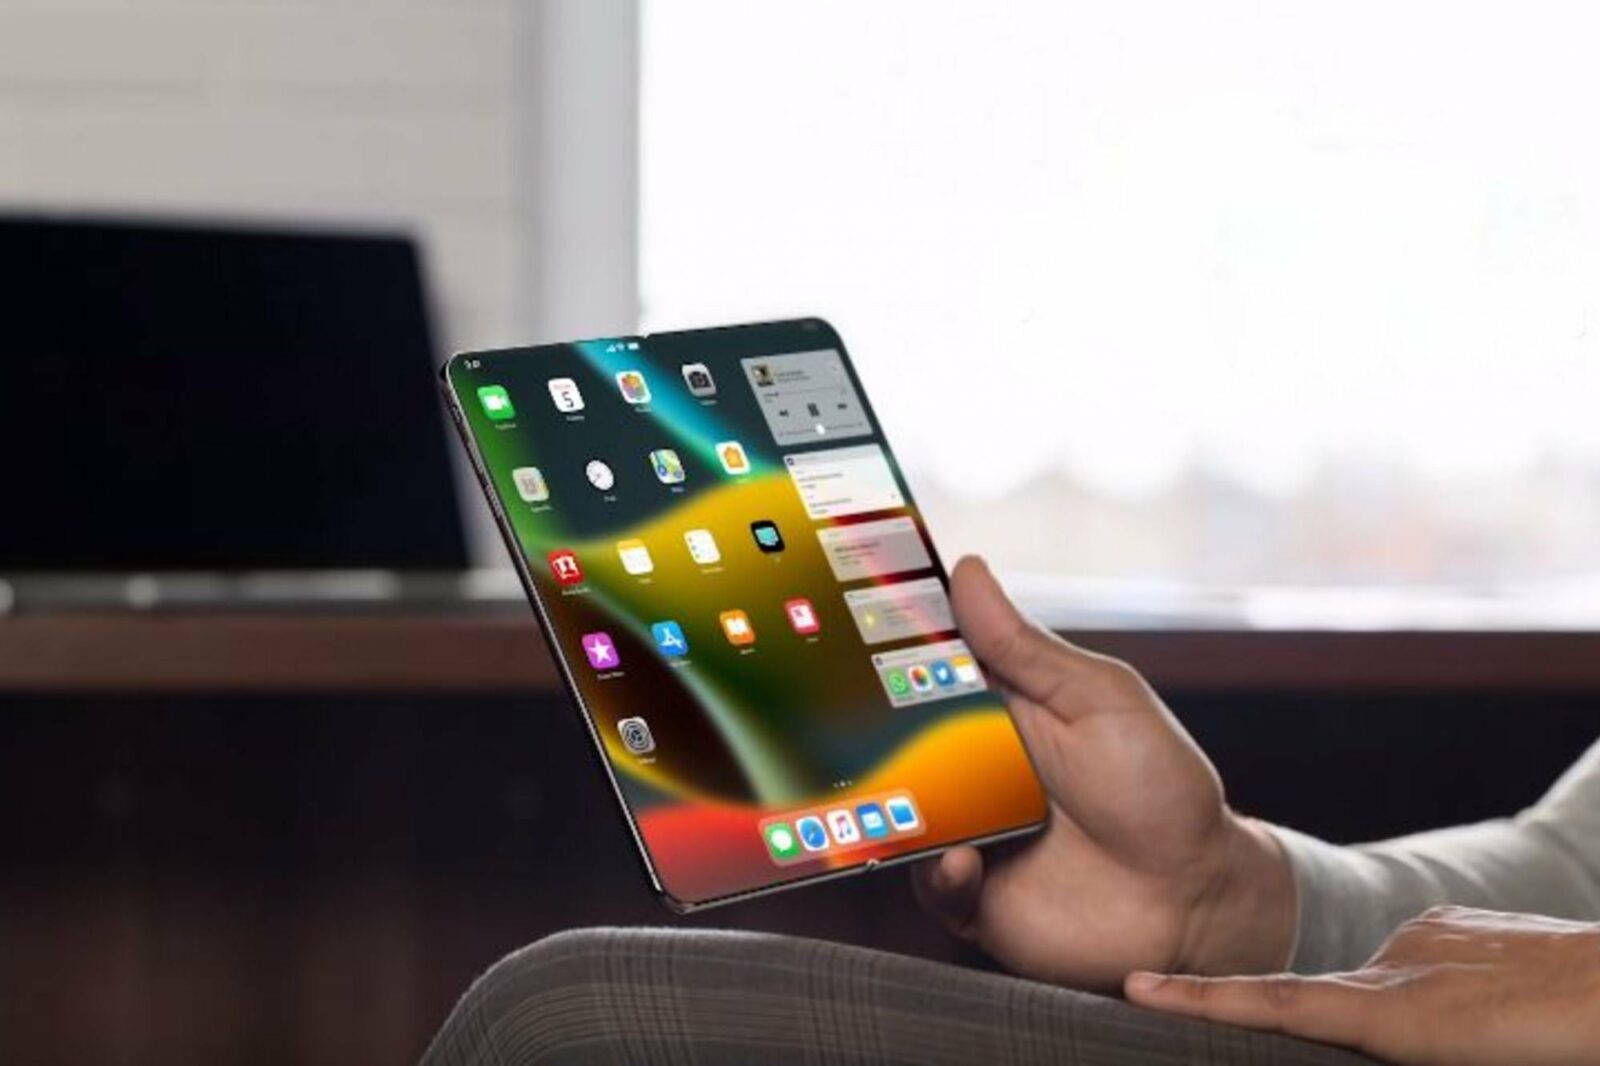 iPad or iPhone which will be Apples first foldable product